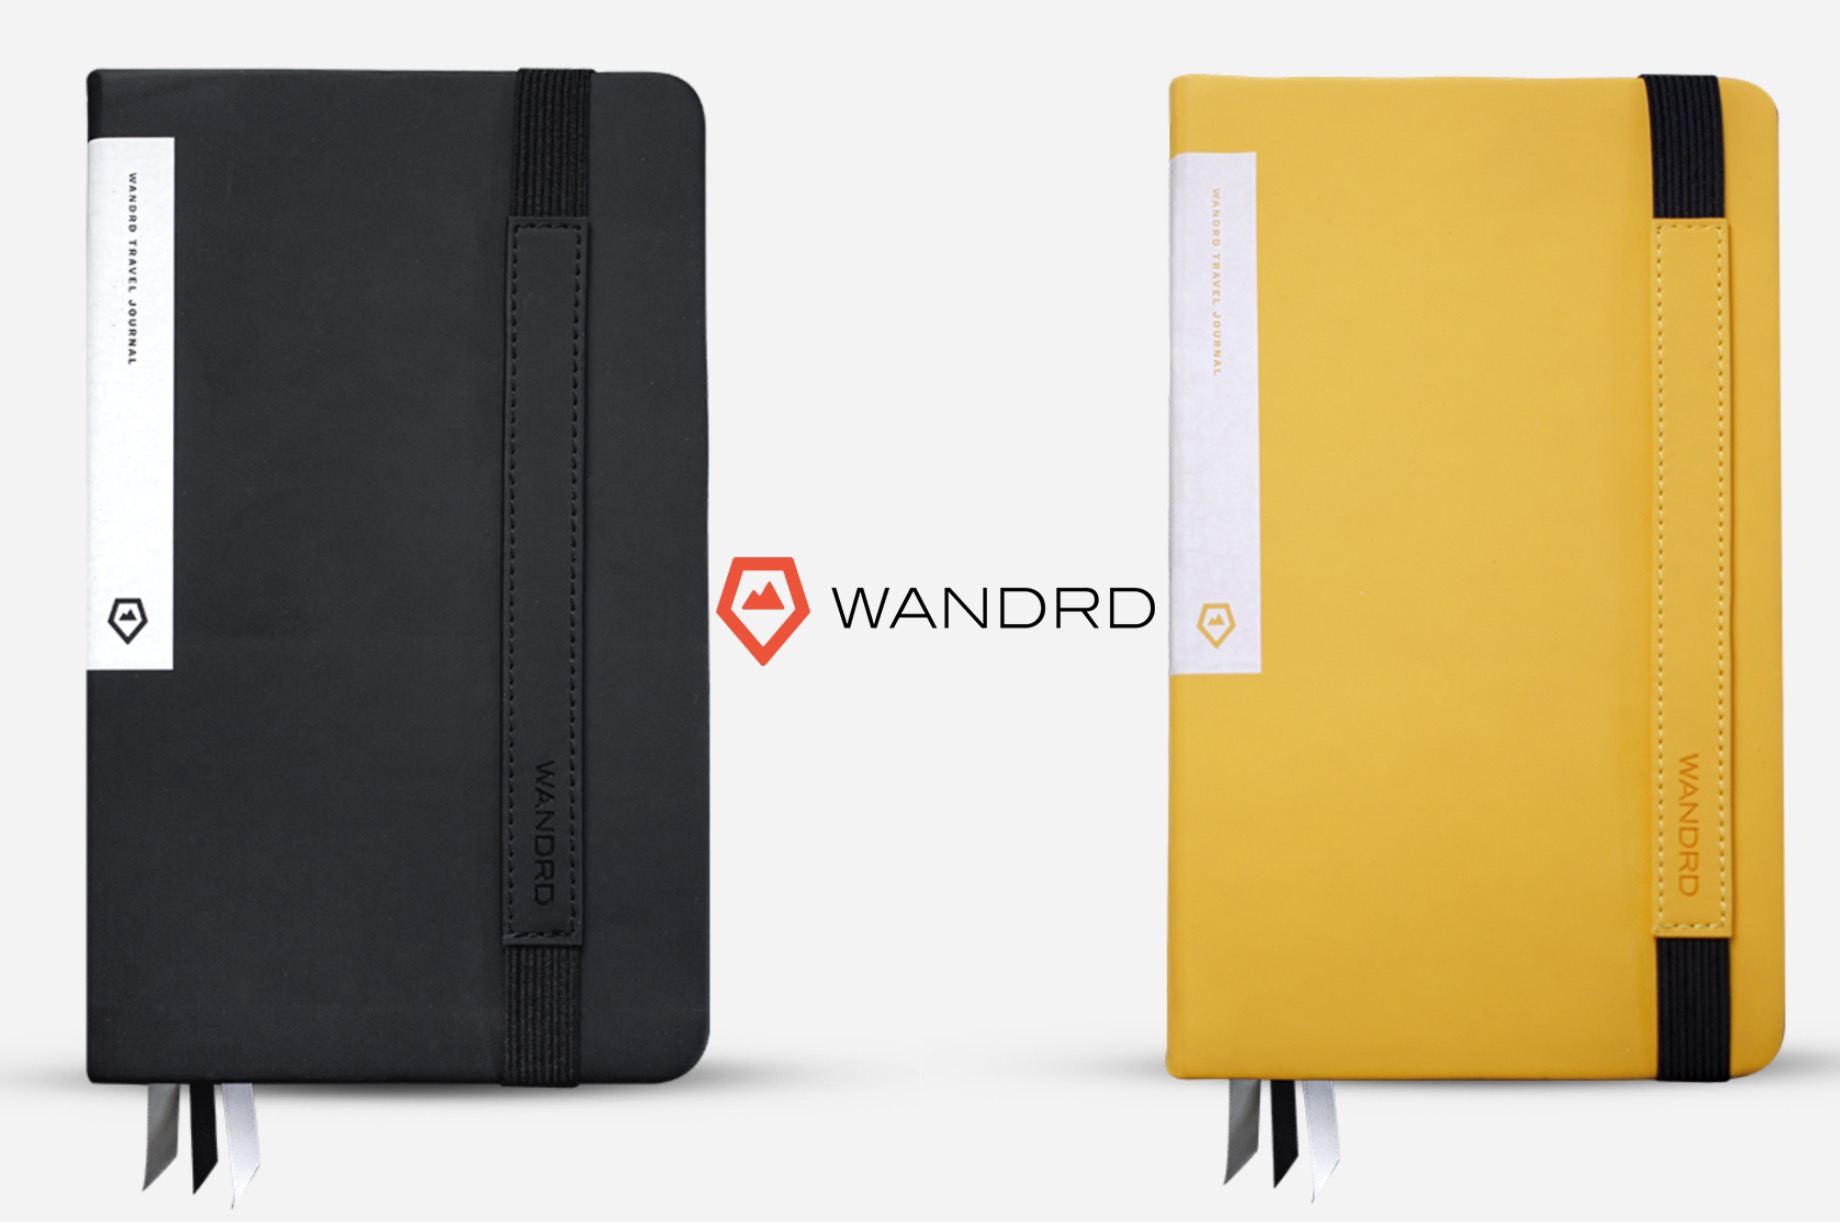 WANDRD travel journal. ($35 in black or yellow)